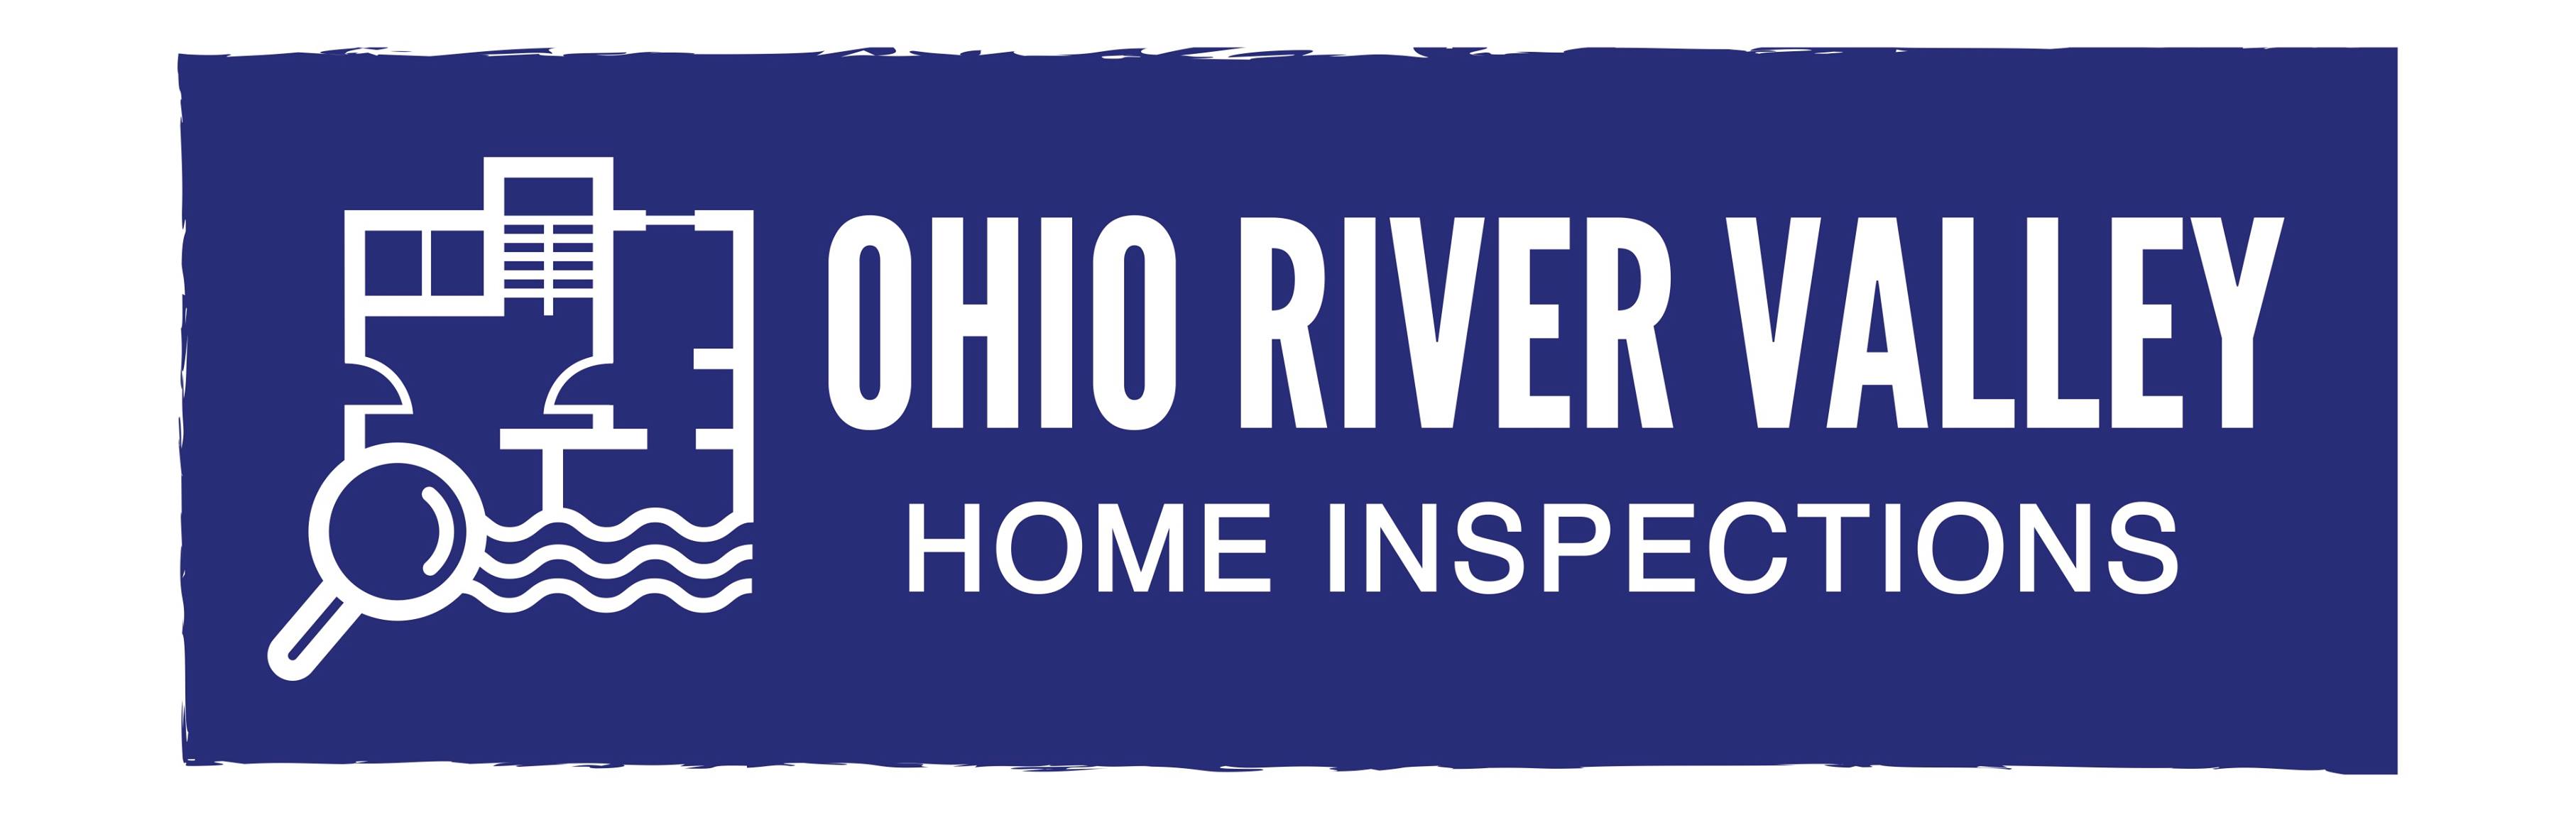 Ohio River Valley Home Inspections Logo